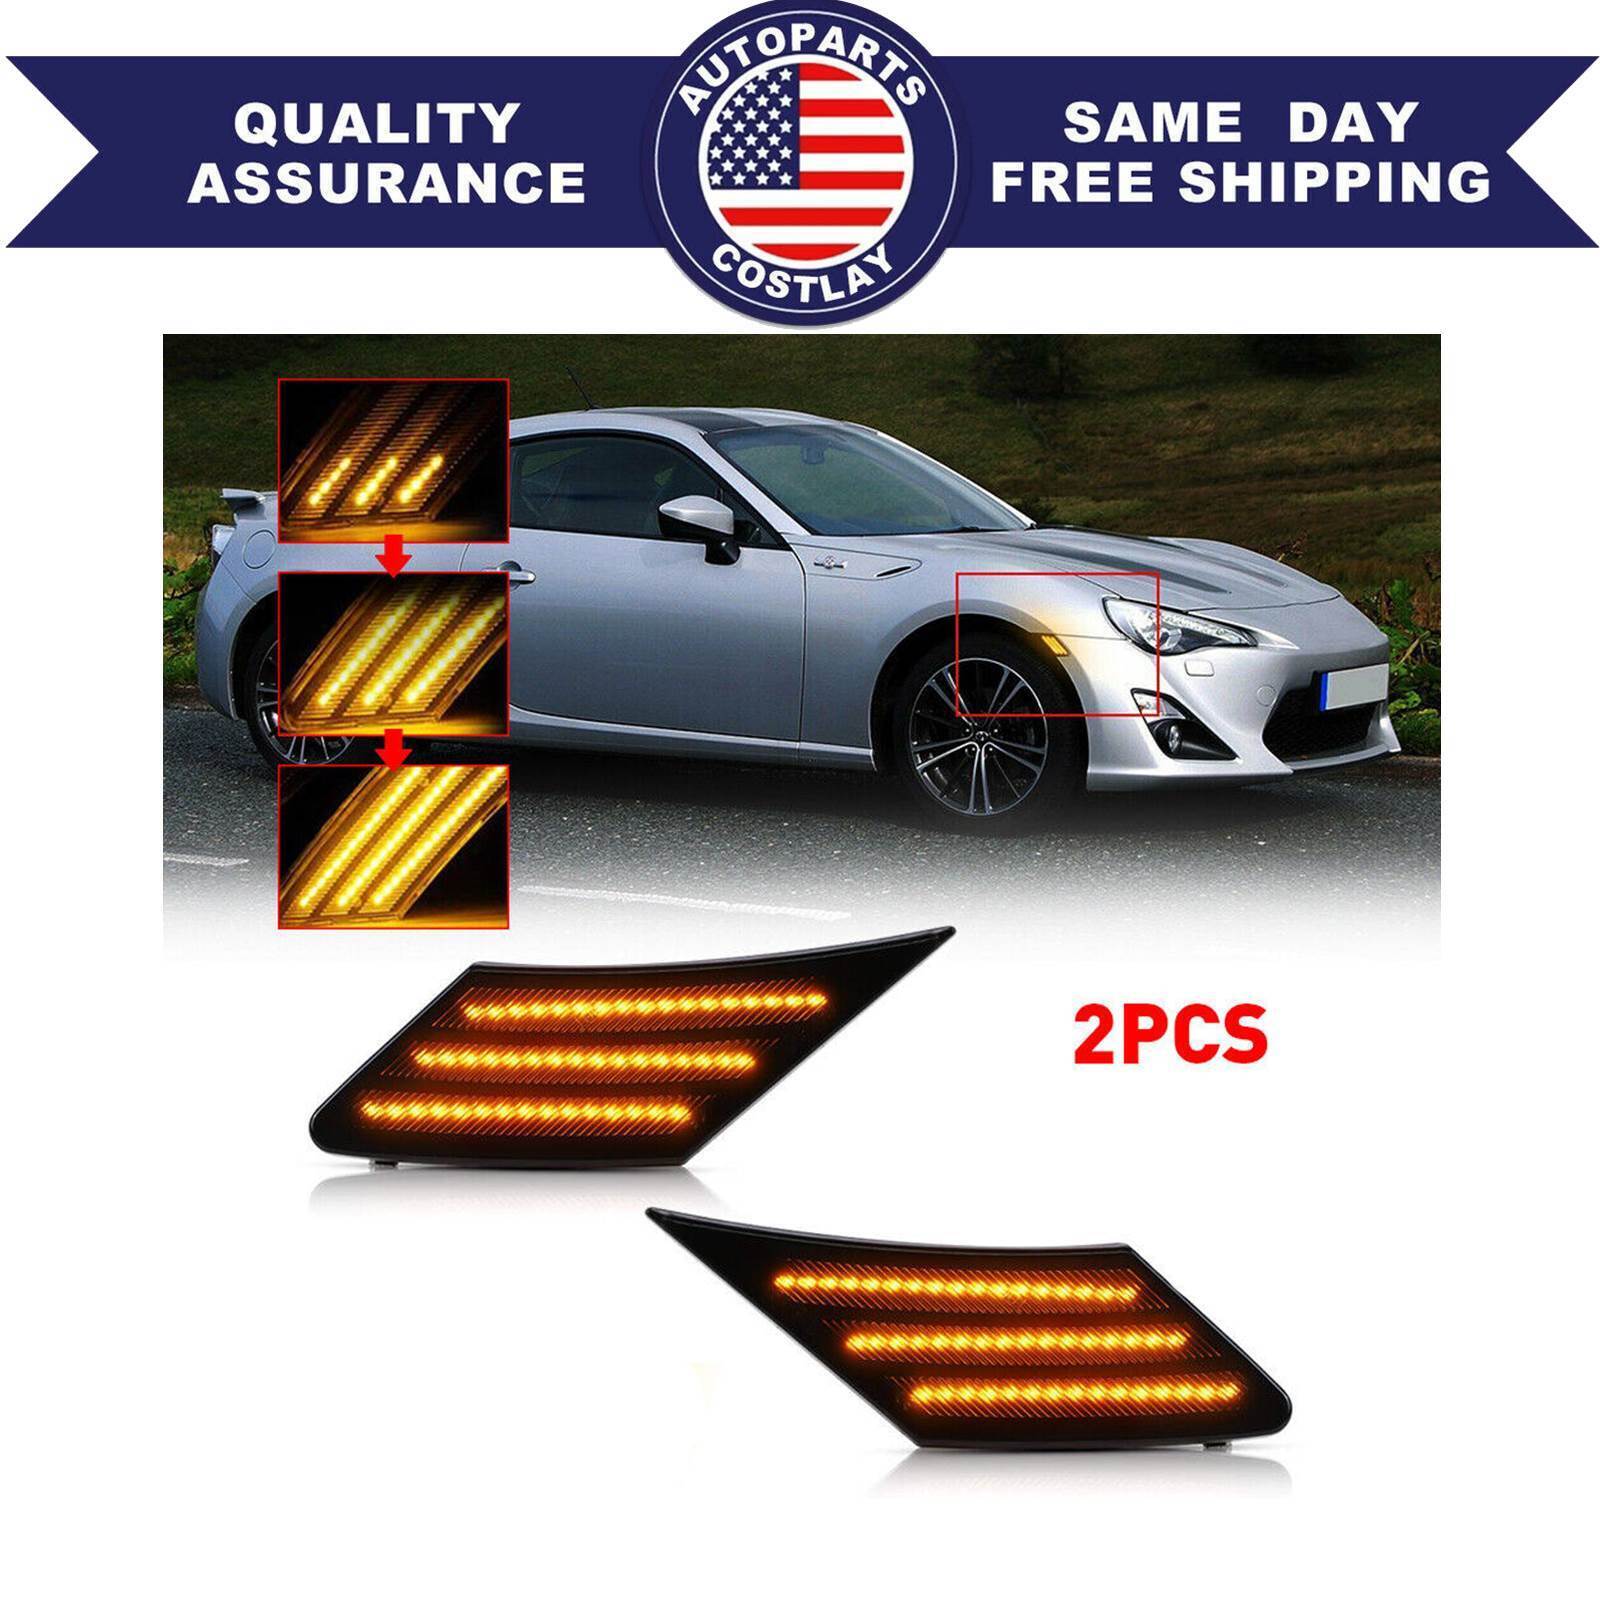 2x Sequential Smoked LED Side Marker Signal Lights Fit For Subaru BRZ Scion FRS